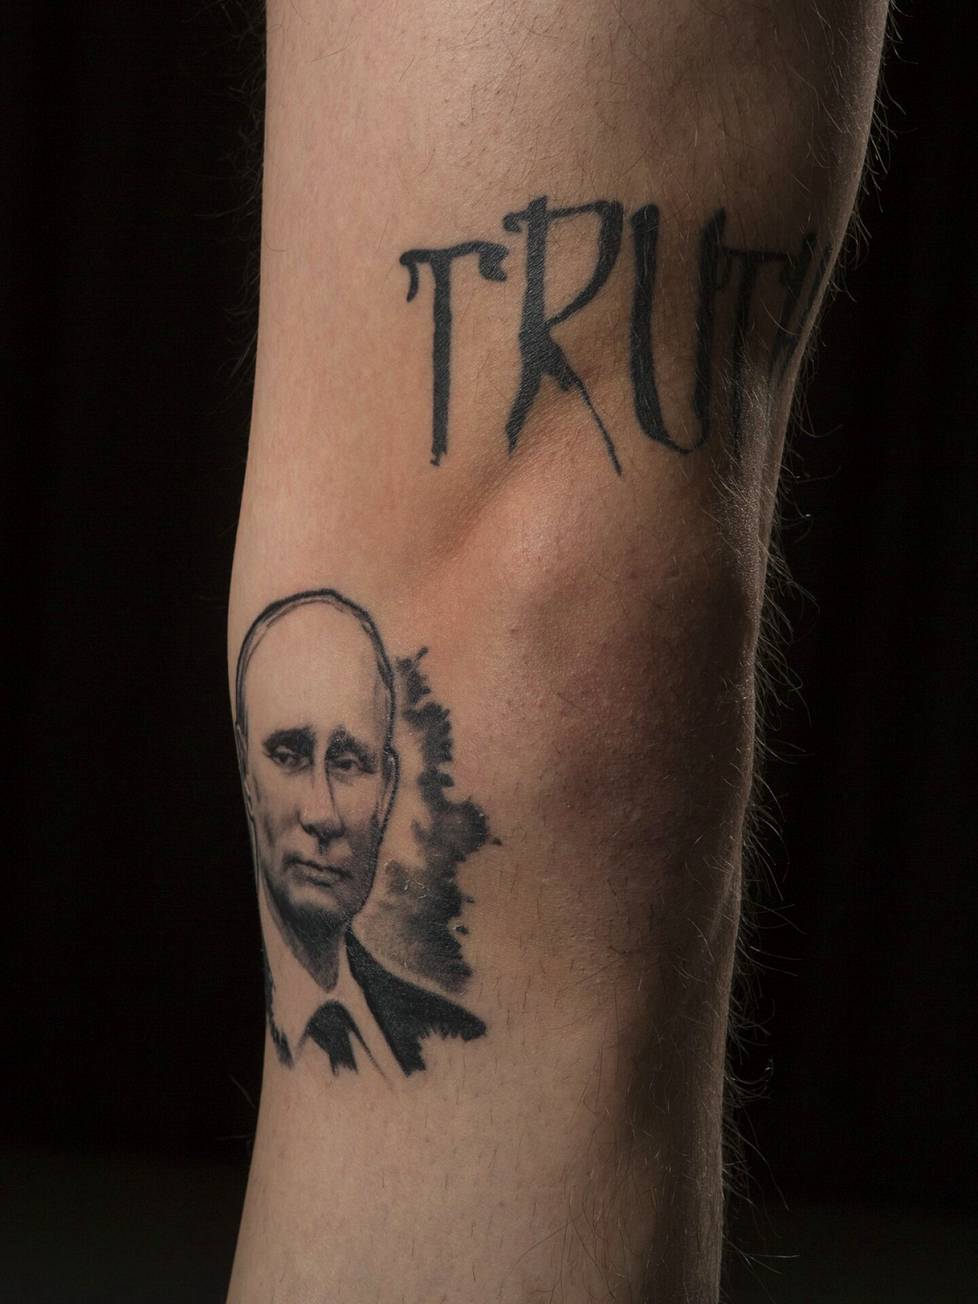 In 2016, Mikael Gabriel's Putin tattoo was not covered.